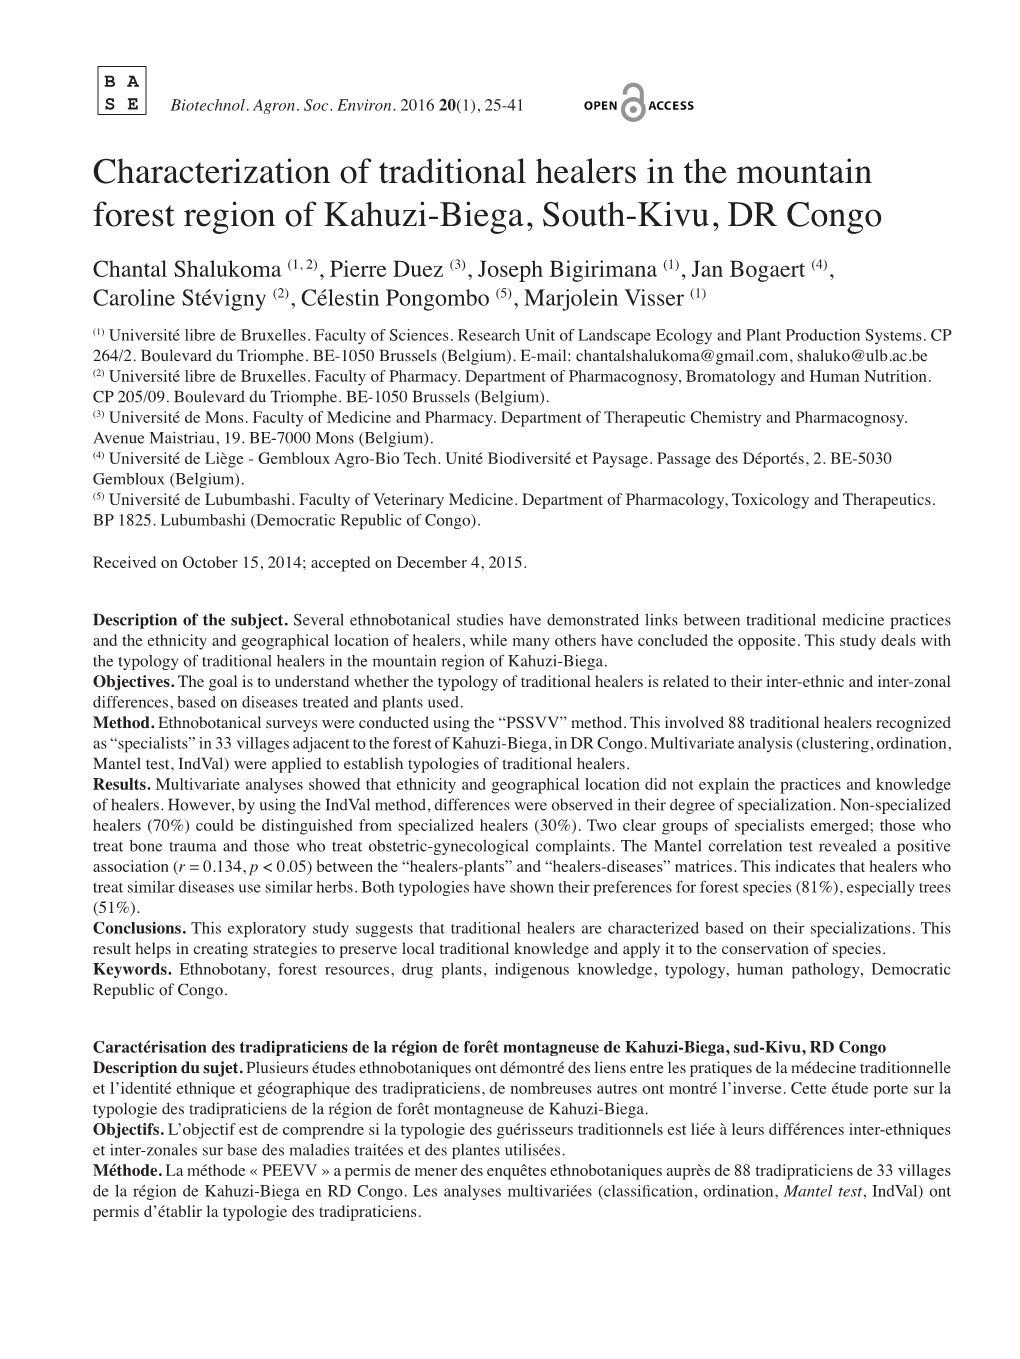 Characterization of Traditional Healers in the Mountain Forest Region Of